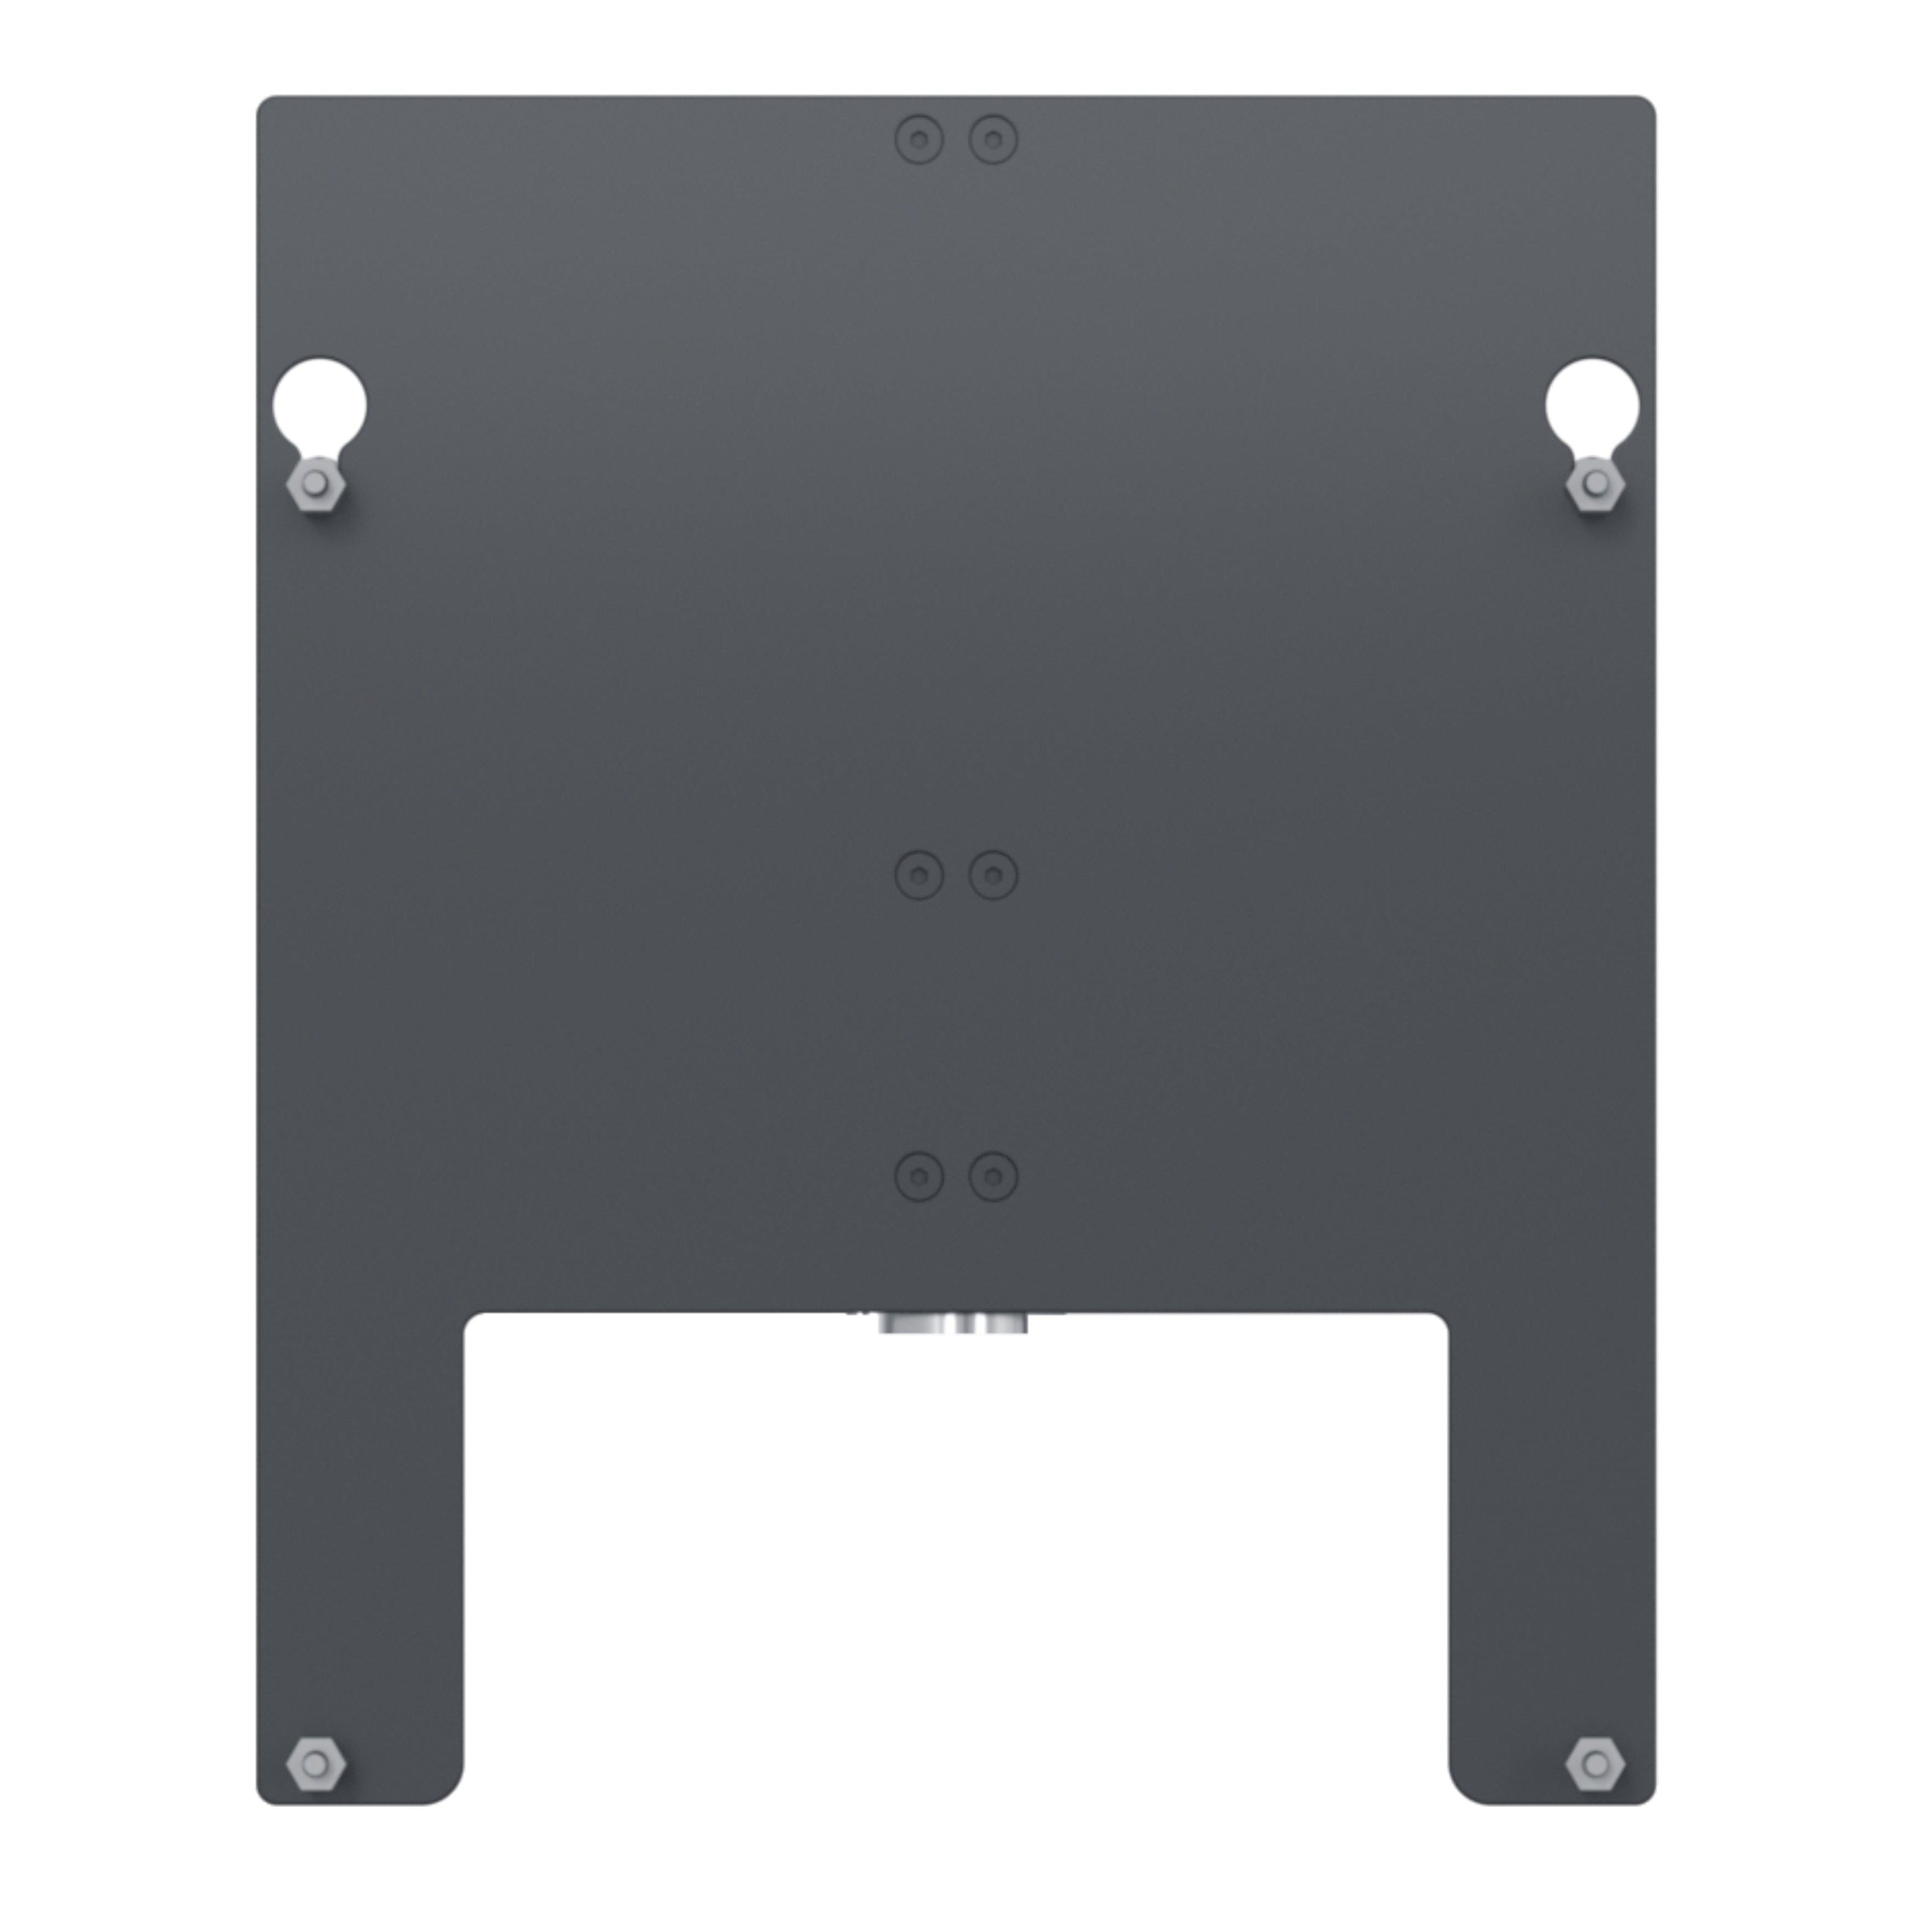 s.77 adapter plate for motorised stand